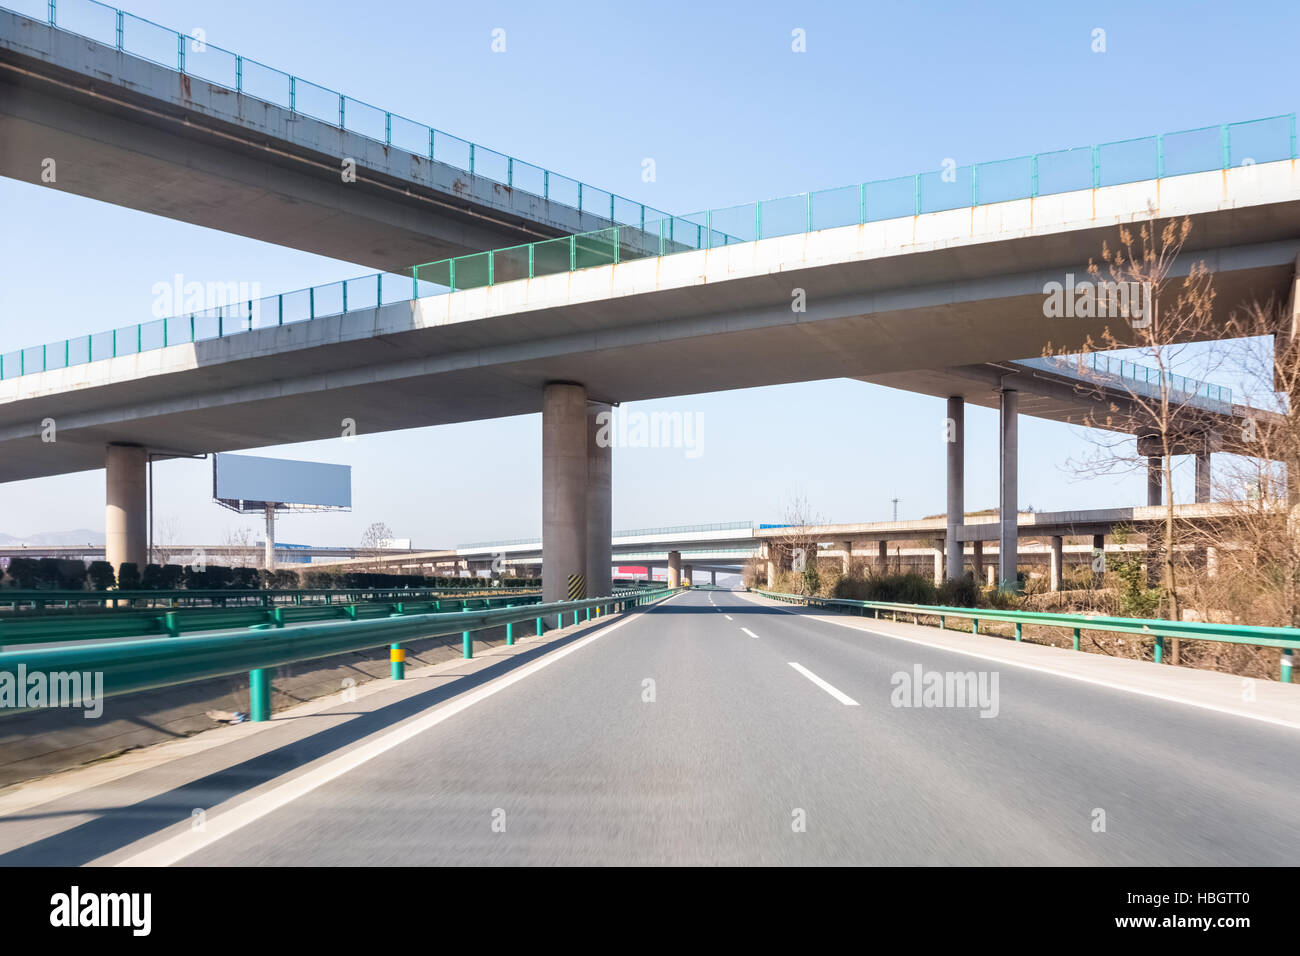 modern freeways with highway overpass Stock Photo